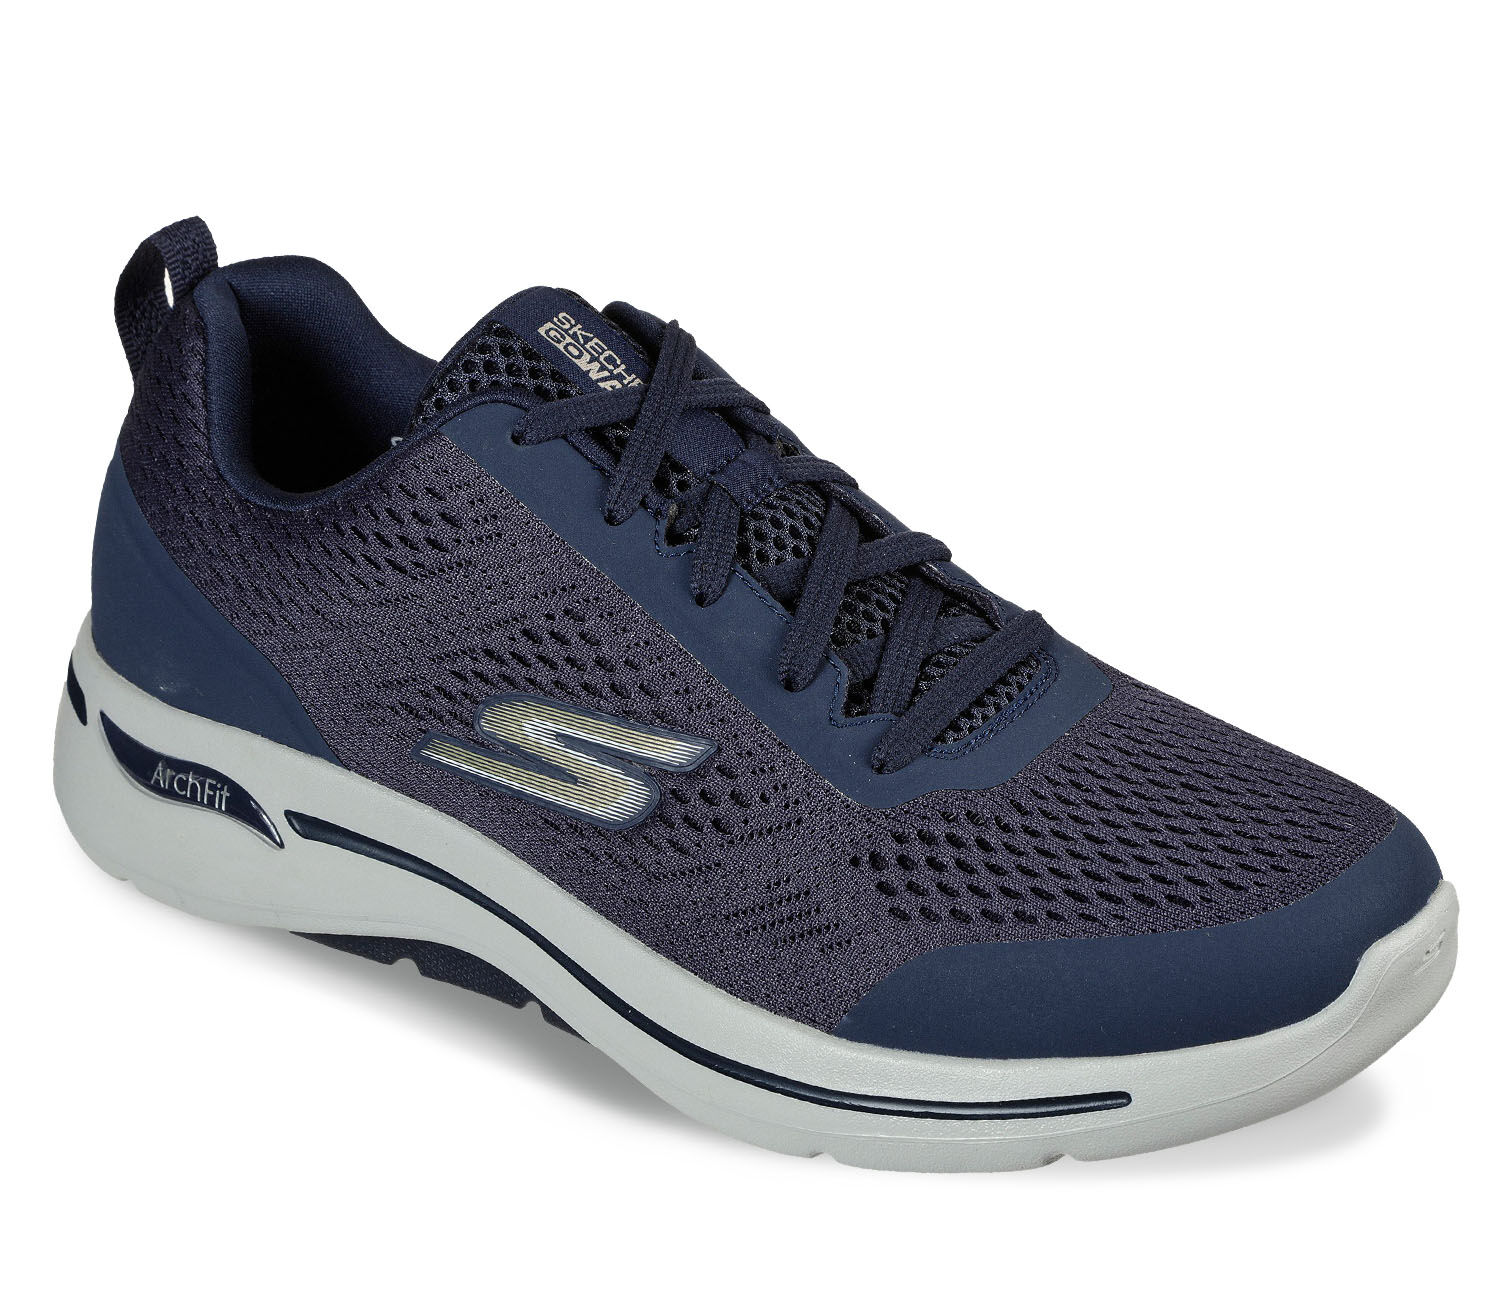 The Skechers GO Walk Evolution is the latest in articulated, segmented  flexible sole design. Designed with Skechers Performance technology and  materials specifically for athletic walking you can go like never before.  available